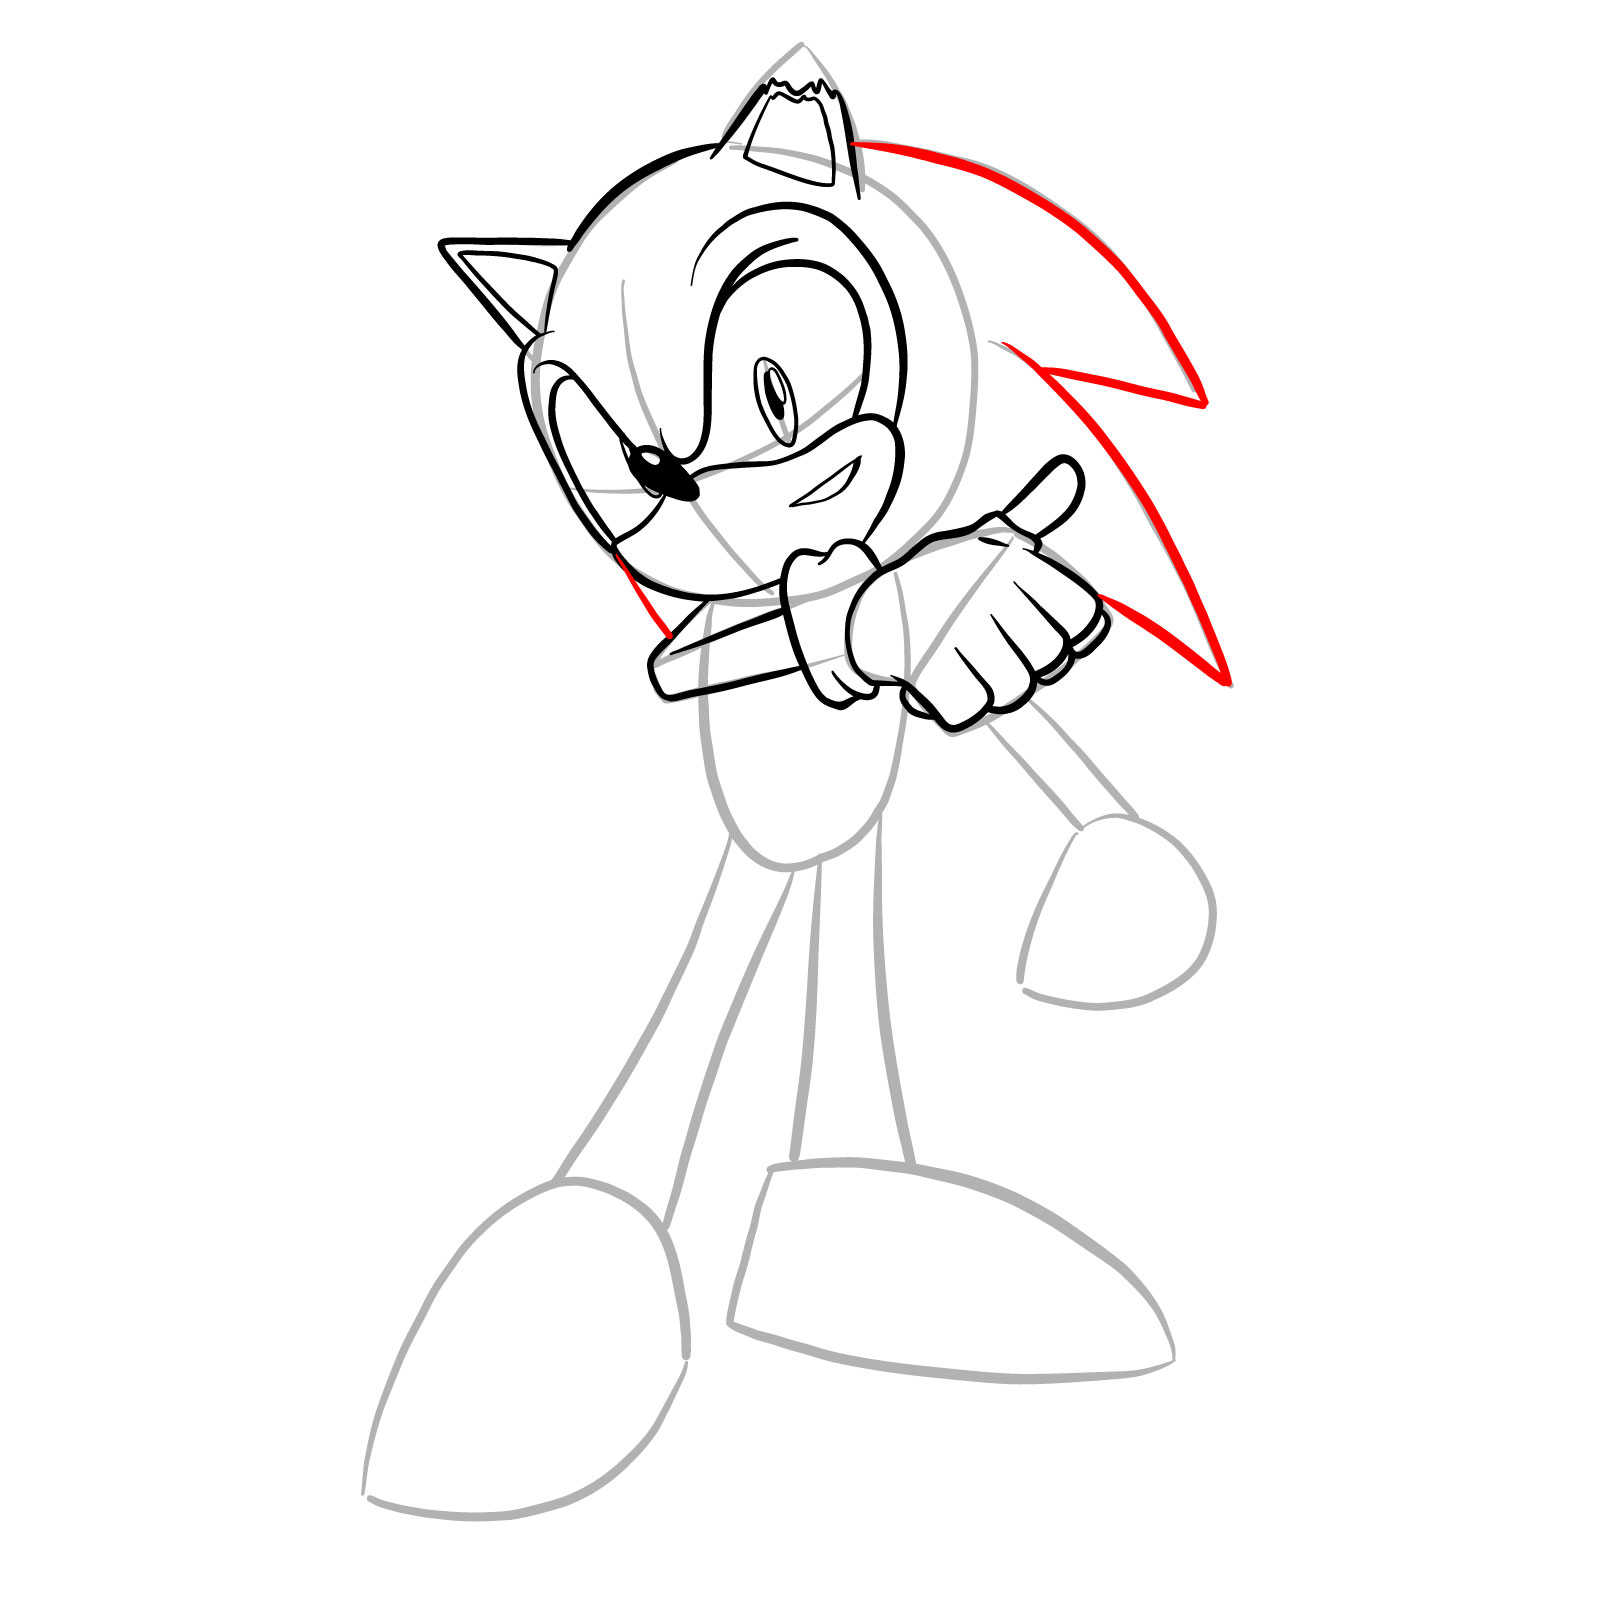 How to draw Coldsteel the Hedgehog - step 18